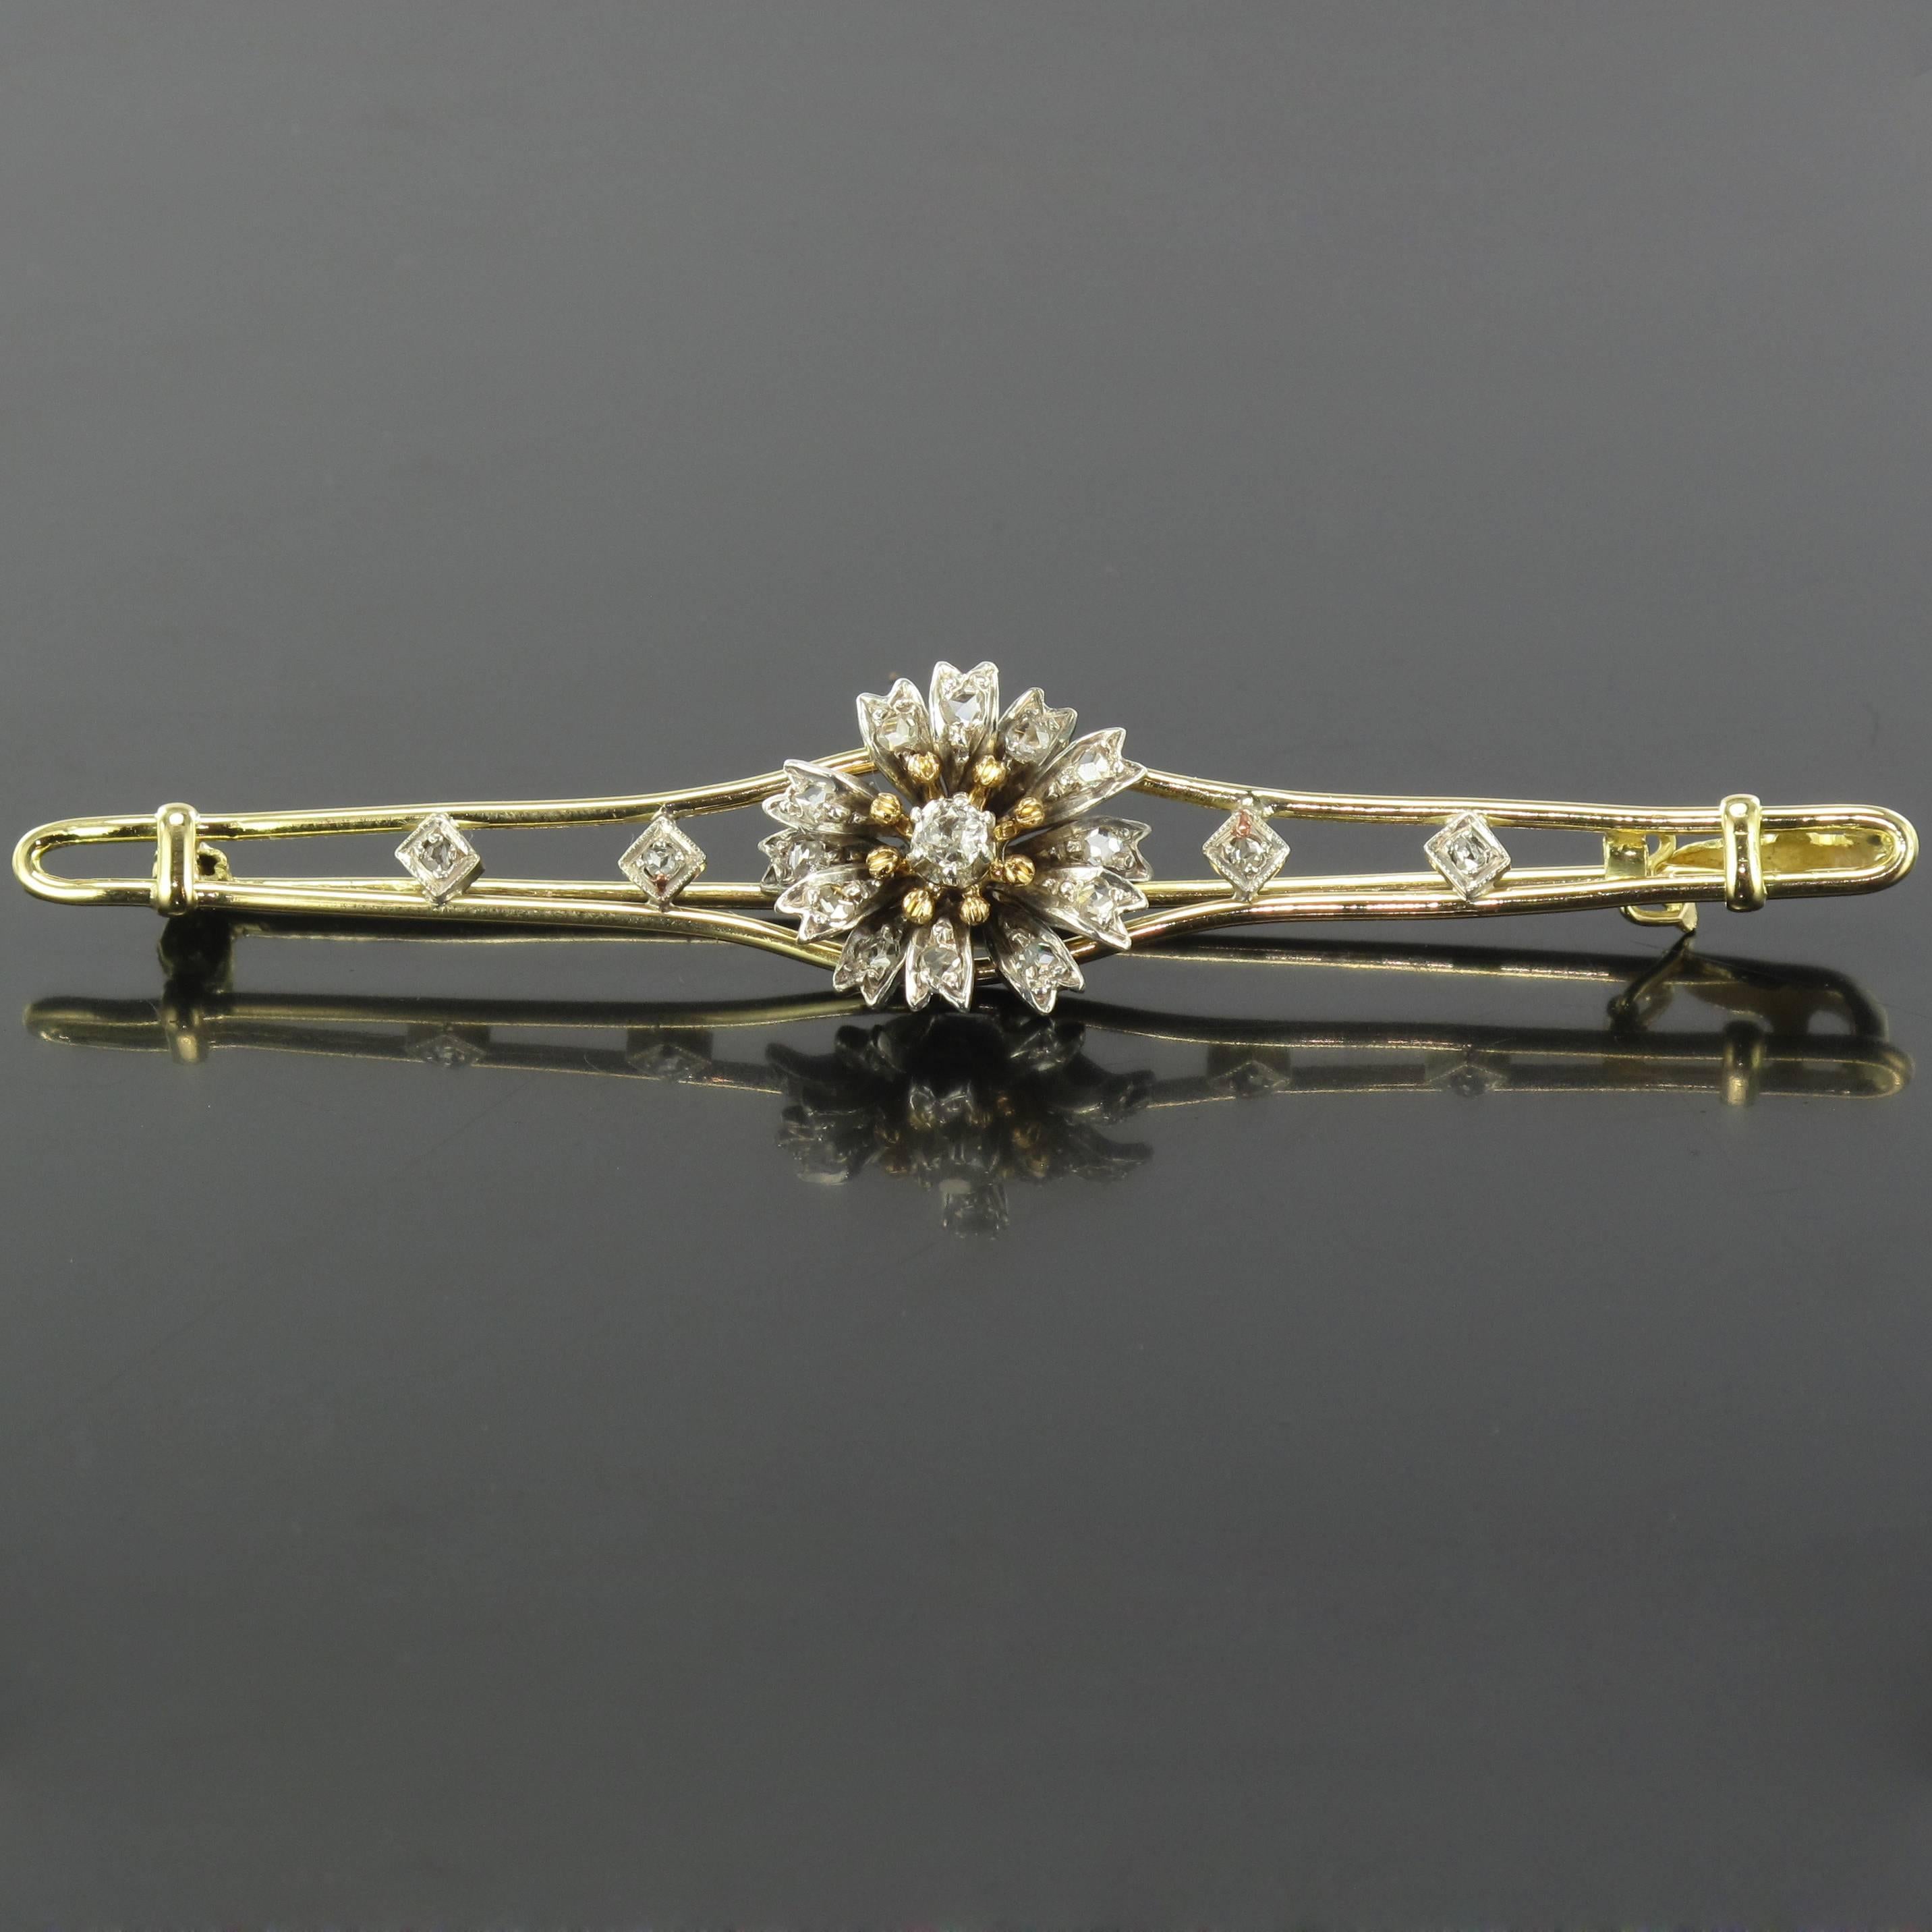 Brooch in 18 carat yellow gold and silver. 
Formed of a flower of which the heart is set with an antique cut diamond with rose cut diamonds in the petals, the flower is set on 2 golden strands held at each side by 2 x 2 rose cut diamonds. At each